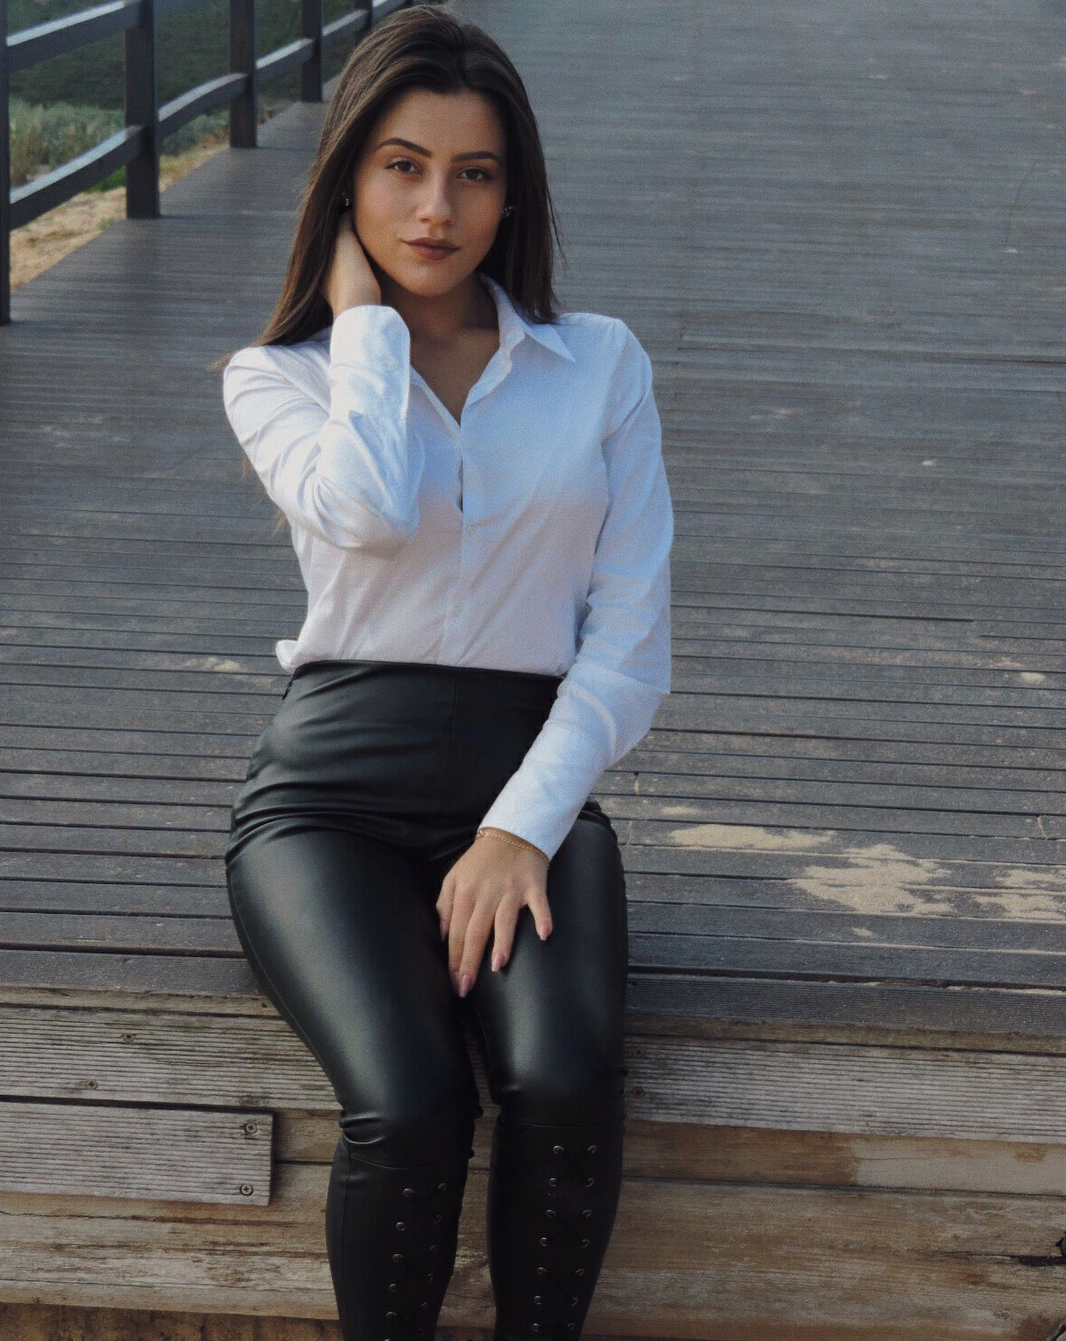 Lovely Ladies in Leather: Miscellaneous Leather 69: Tight Pants and ...